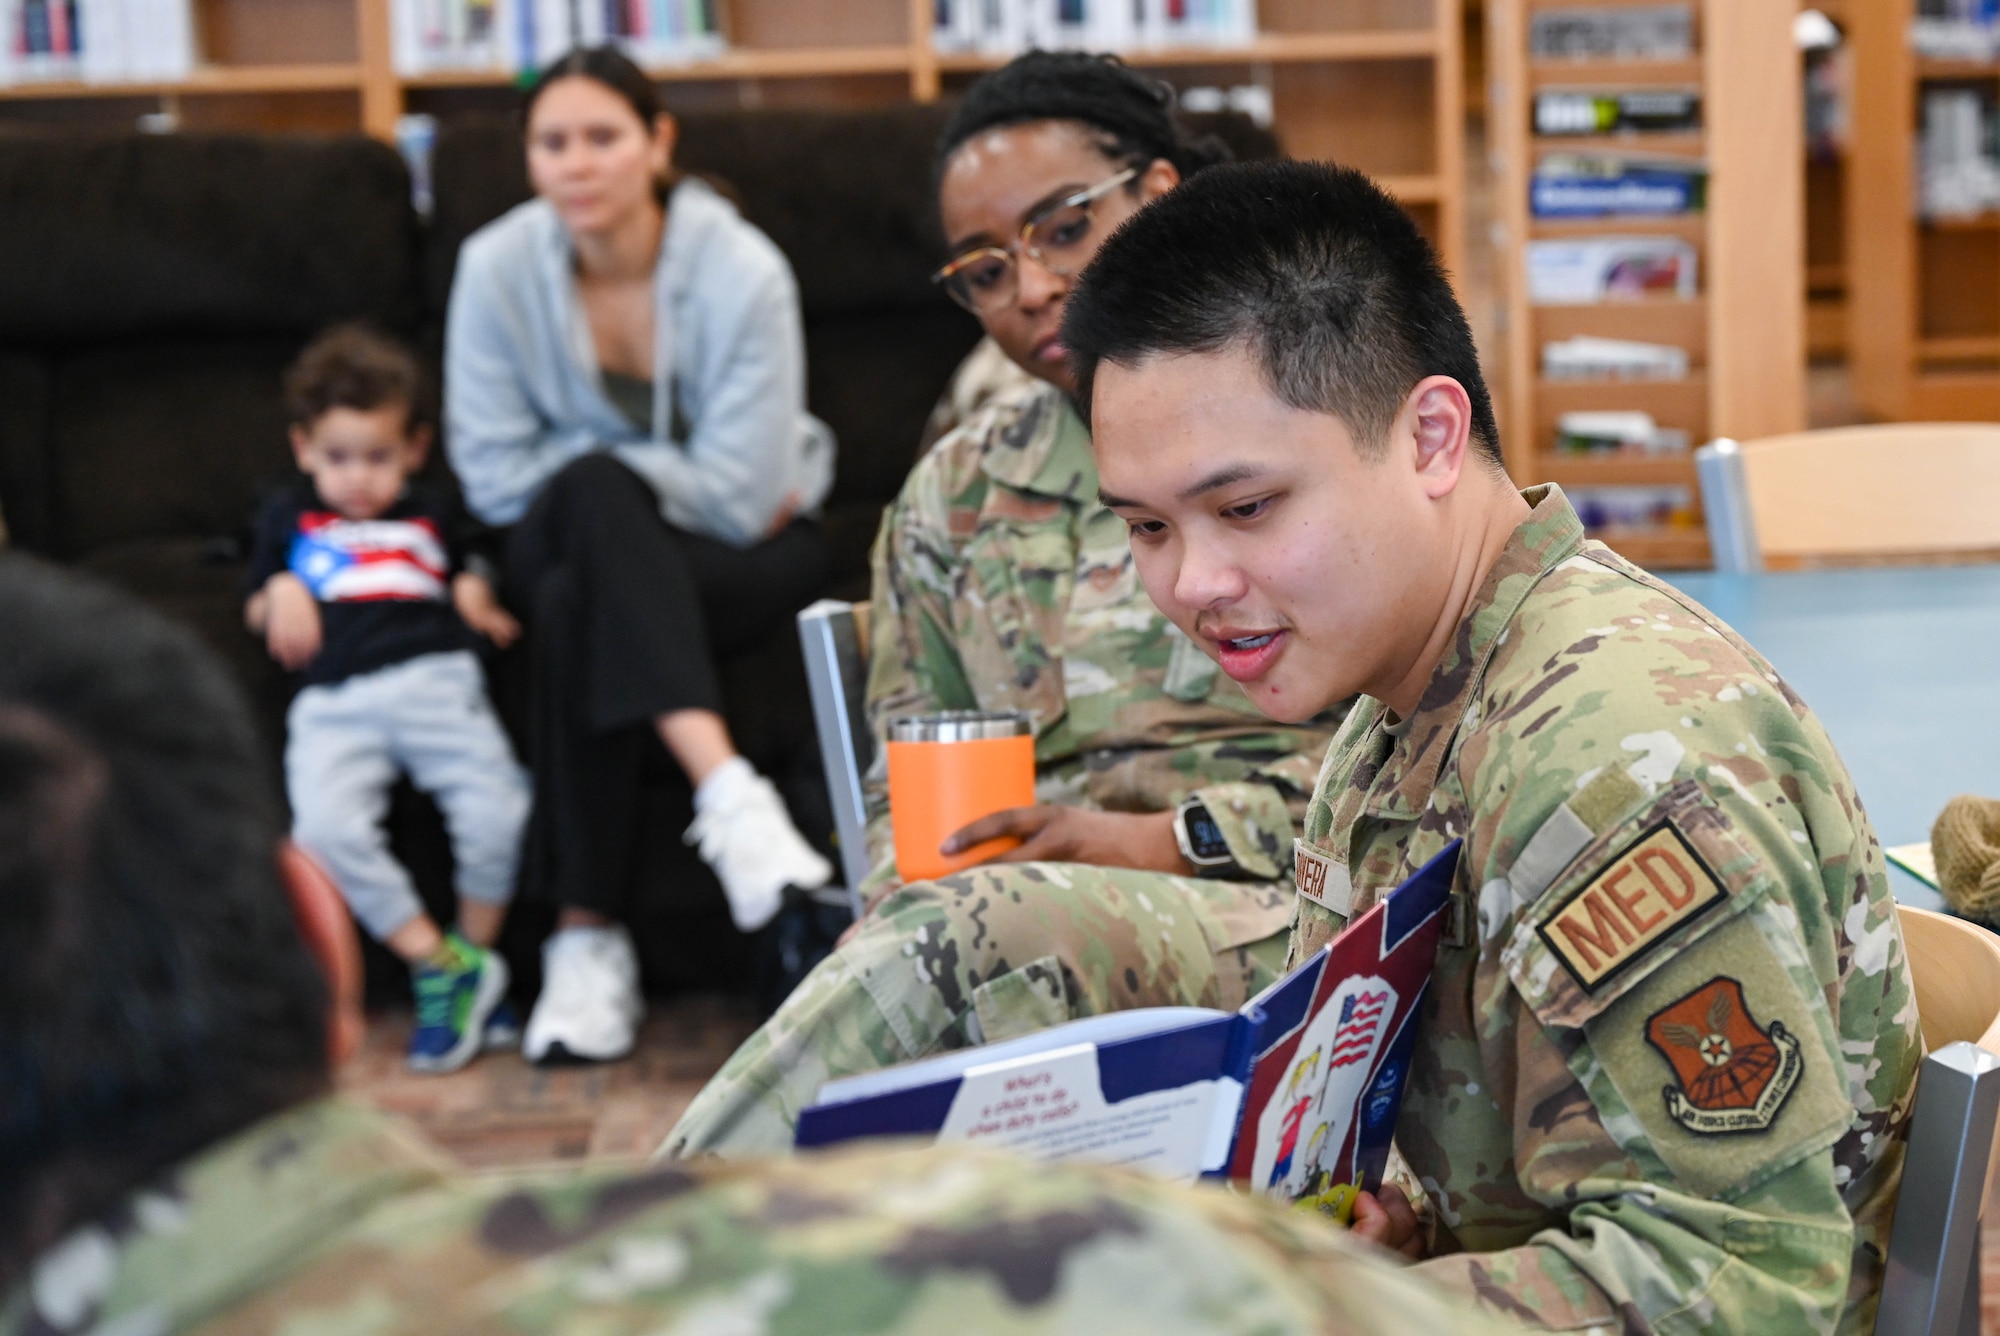 Ellsworth Library celebrates Month of the Military Child through “Little Warriors” Story Time Program